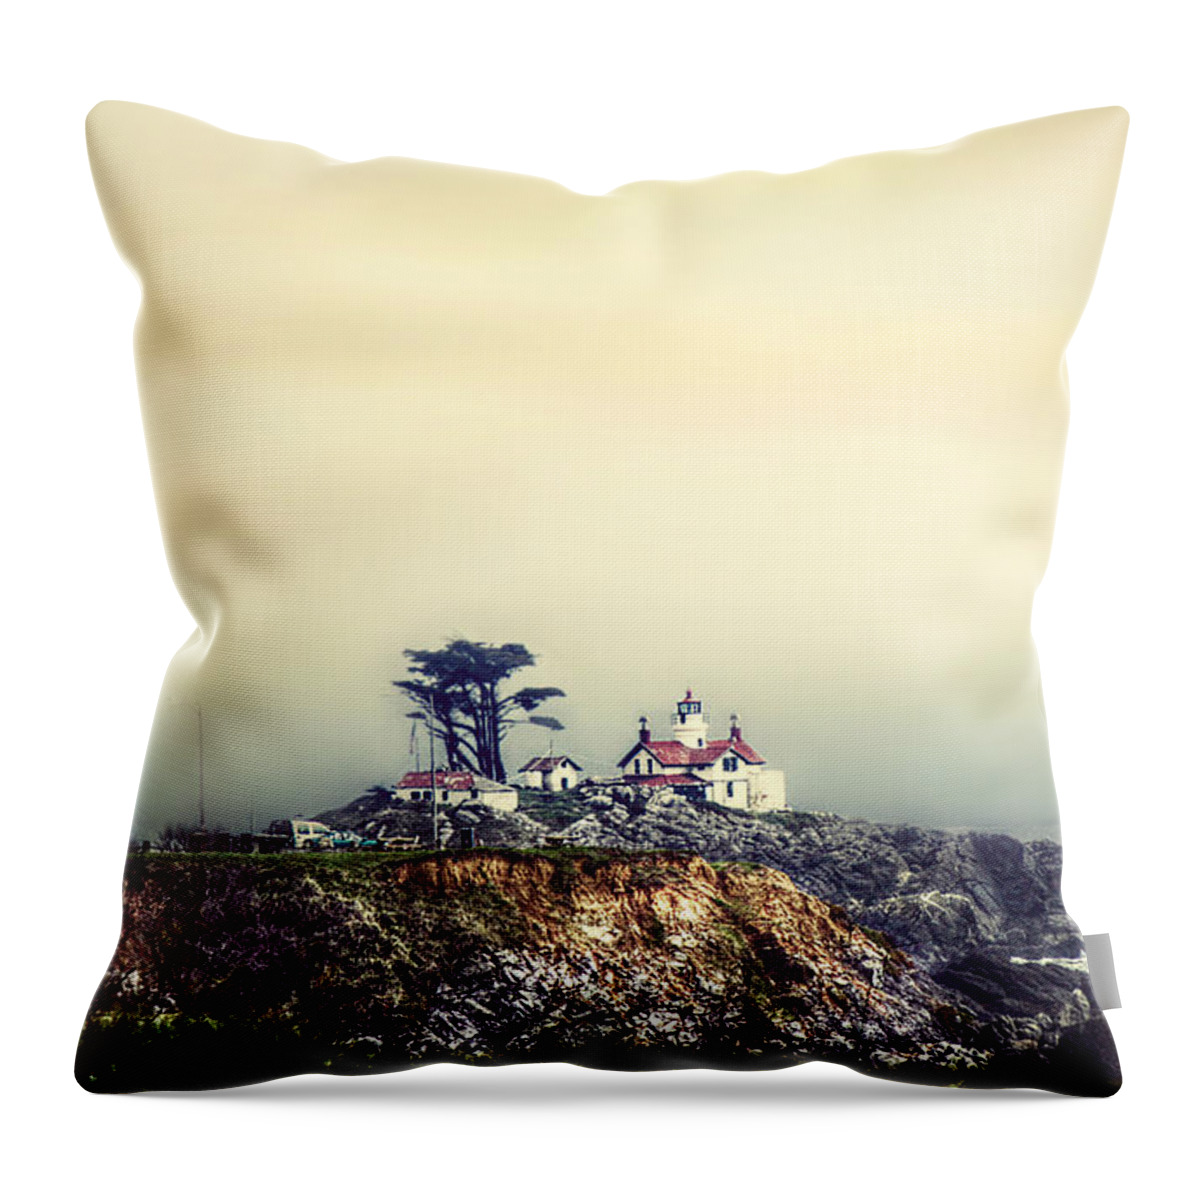 Lighthouse Throw Pillow featuring the photograph Golden Lights by Melanie Lankford Photography